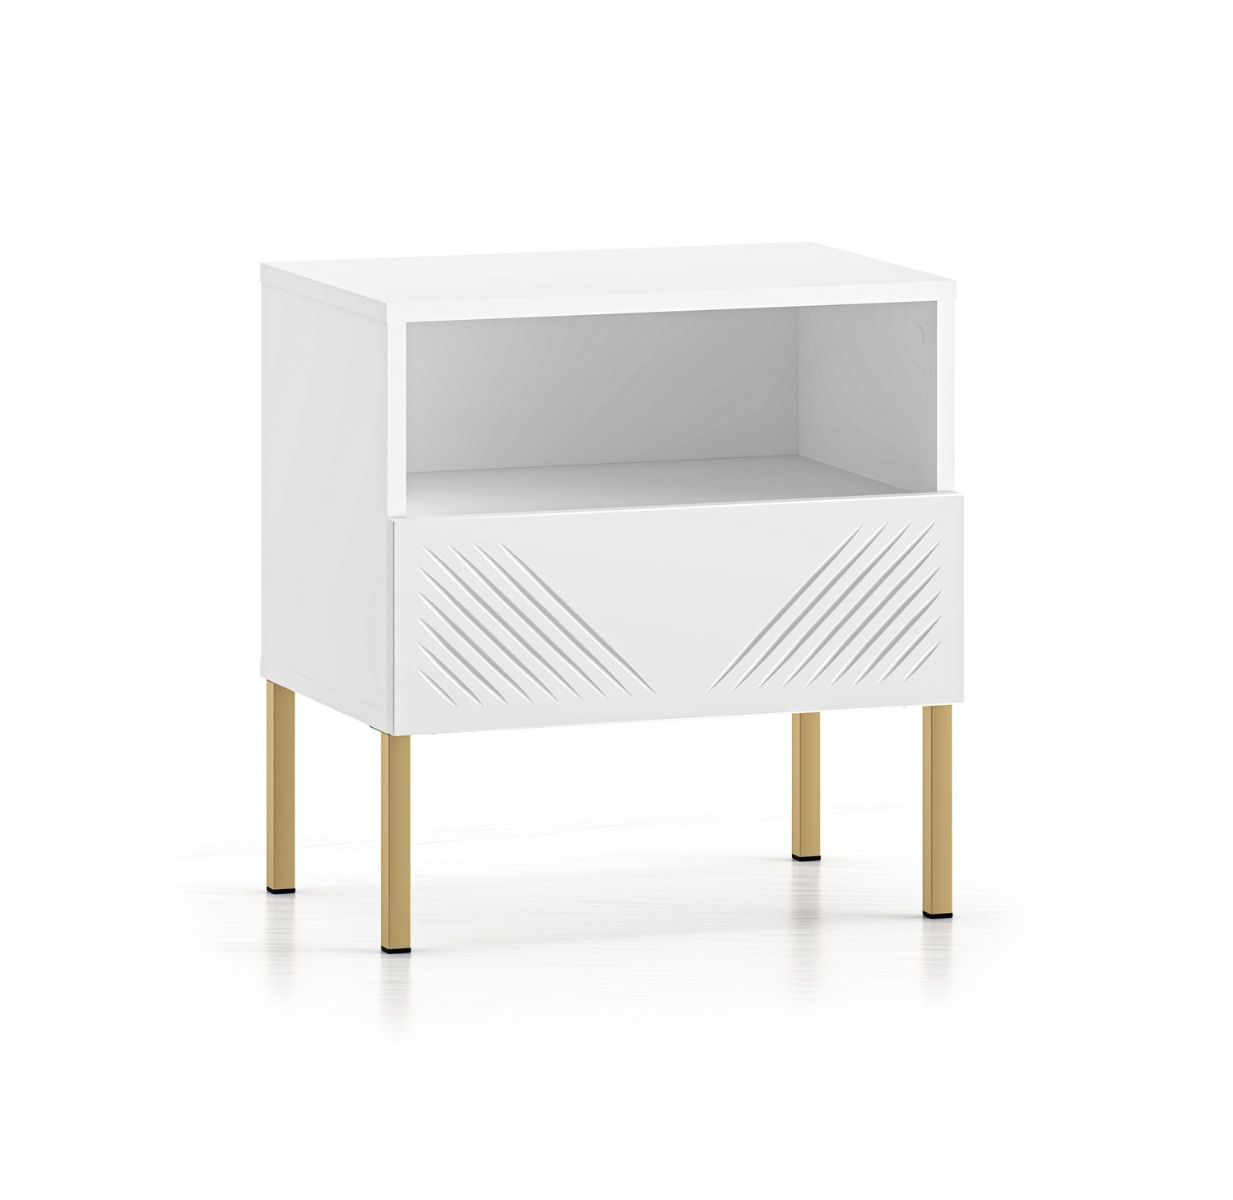 Bedside cabinet with push-to-open function Taos 18, color: white matt, easy to combine, dimensions: 53 x 50 x 34 cm, legs: gold, with 1 drawer and 1 compartment, soft-close system